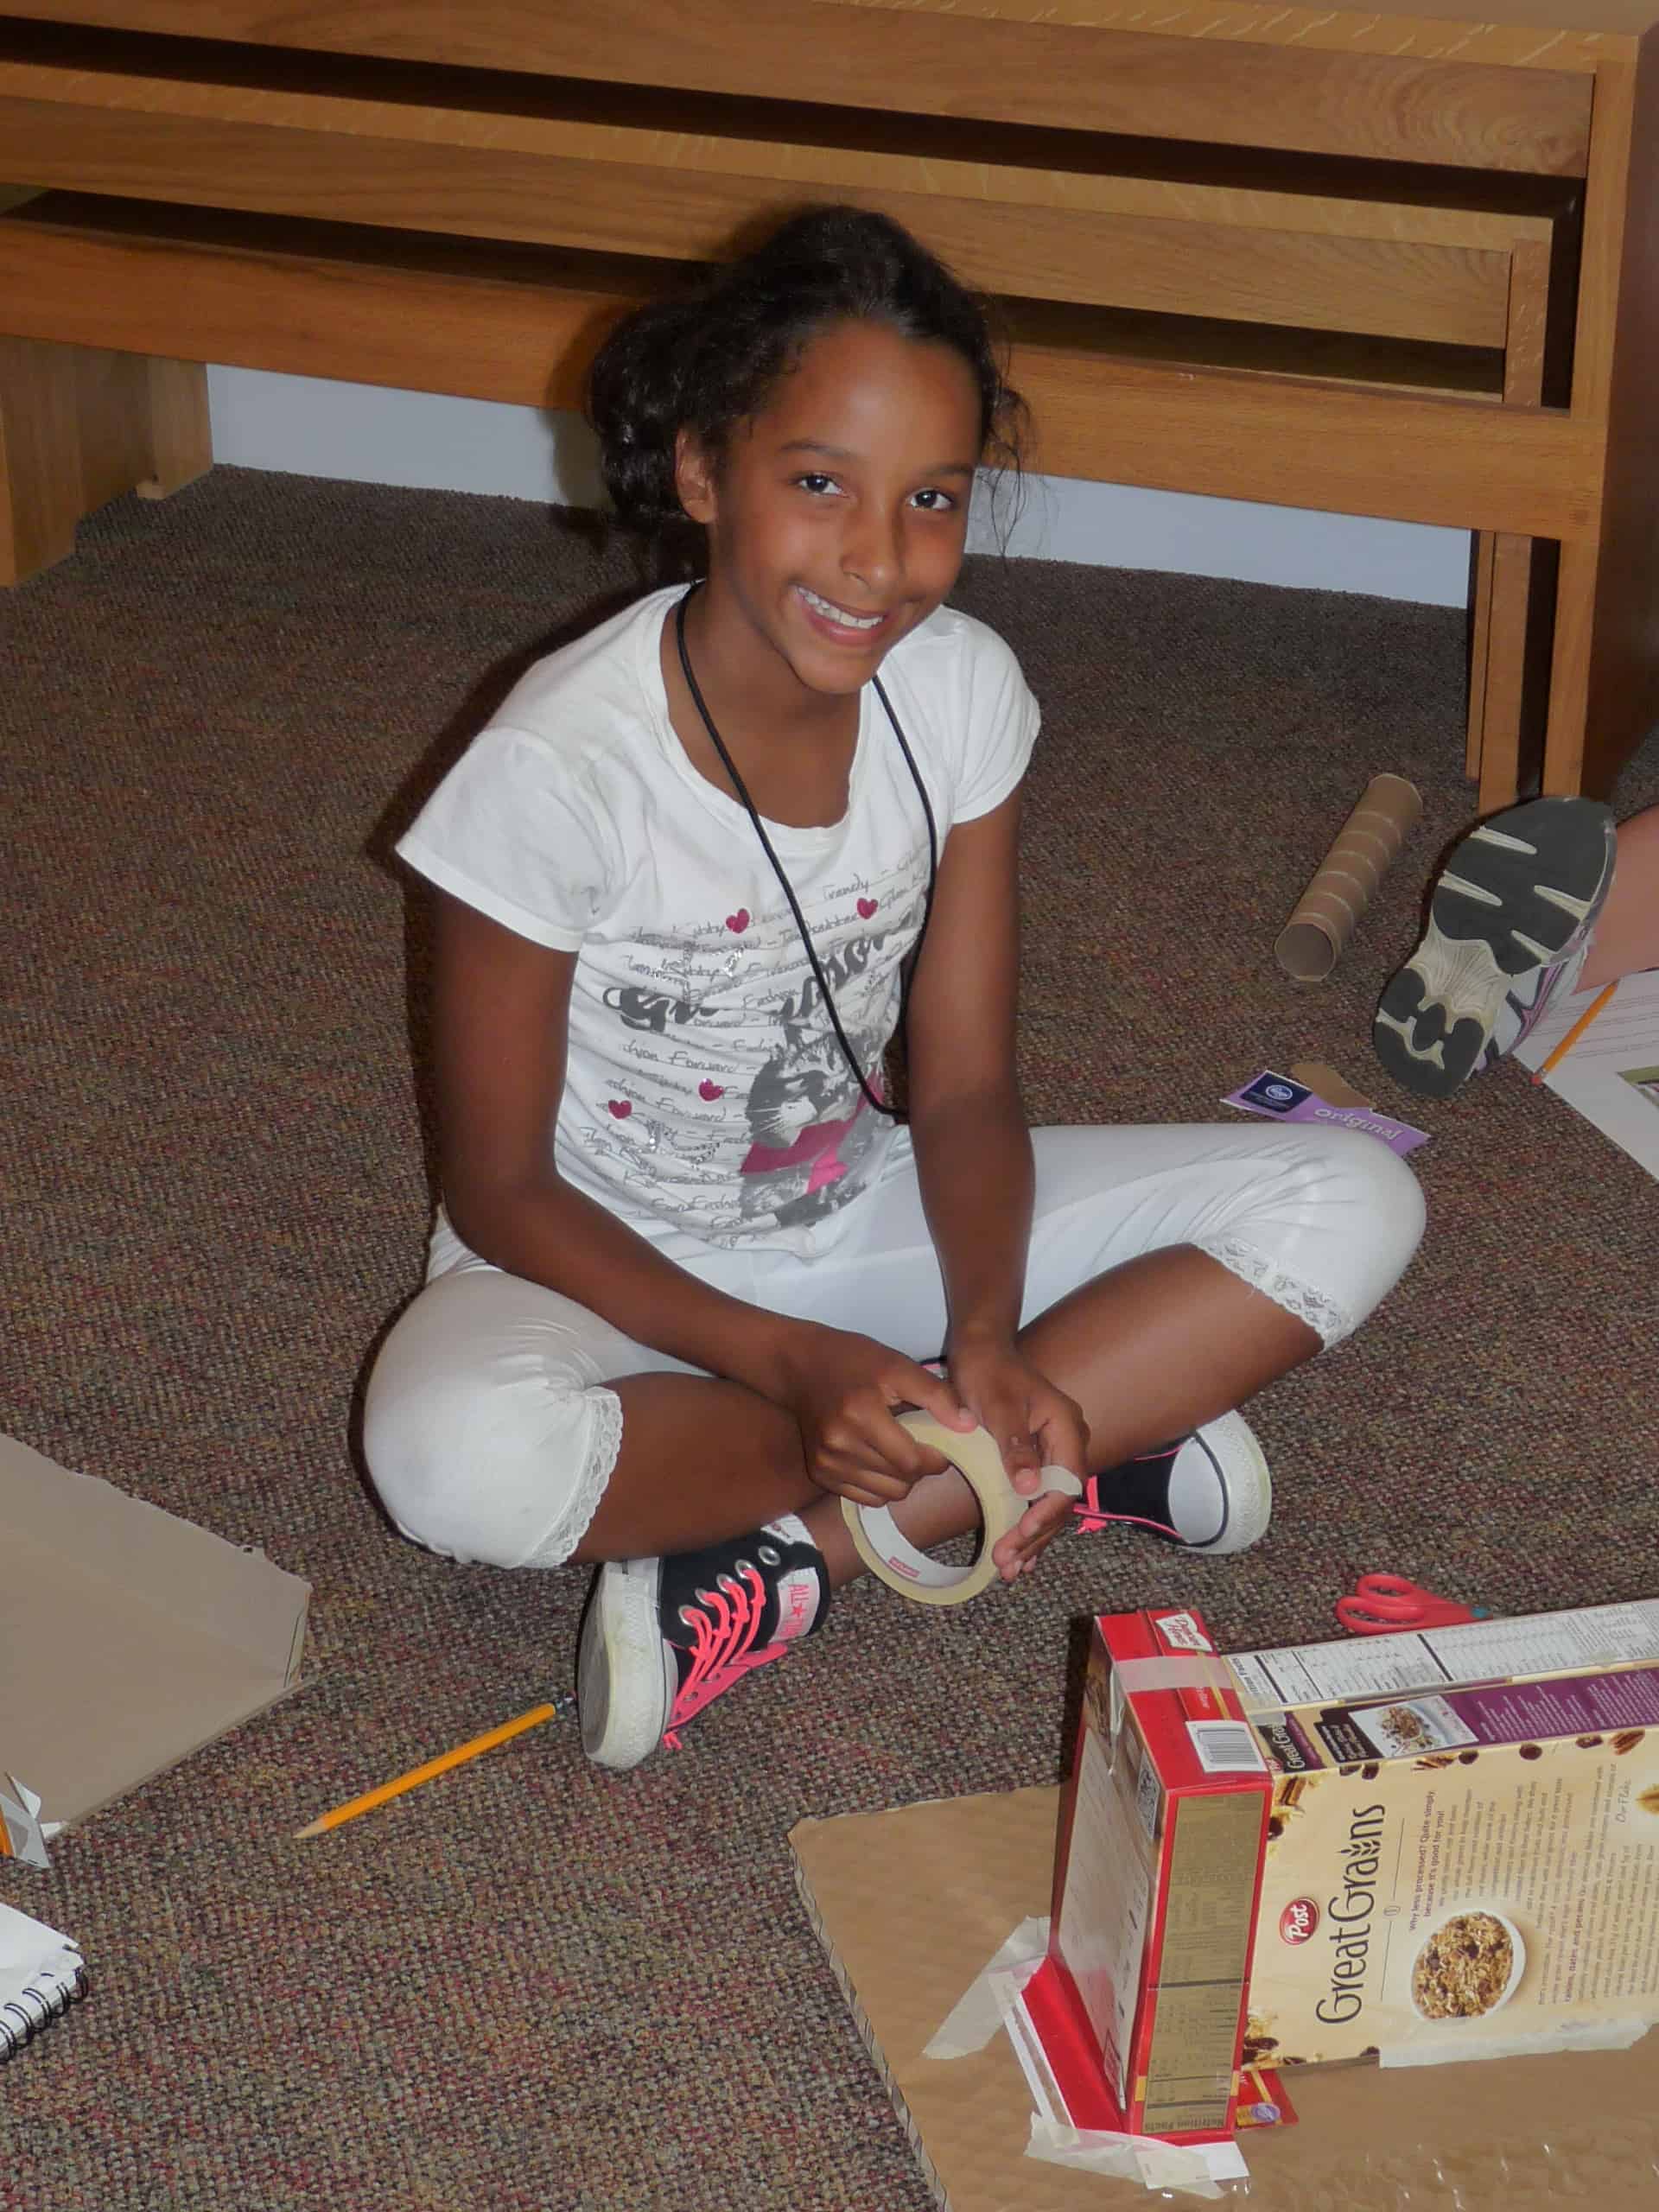 A young Black girl sits cross-legged on the floor working on an ArchiCamp project